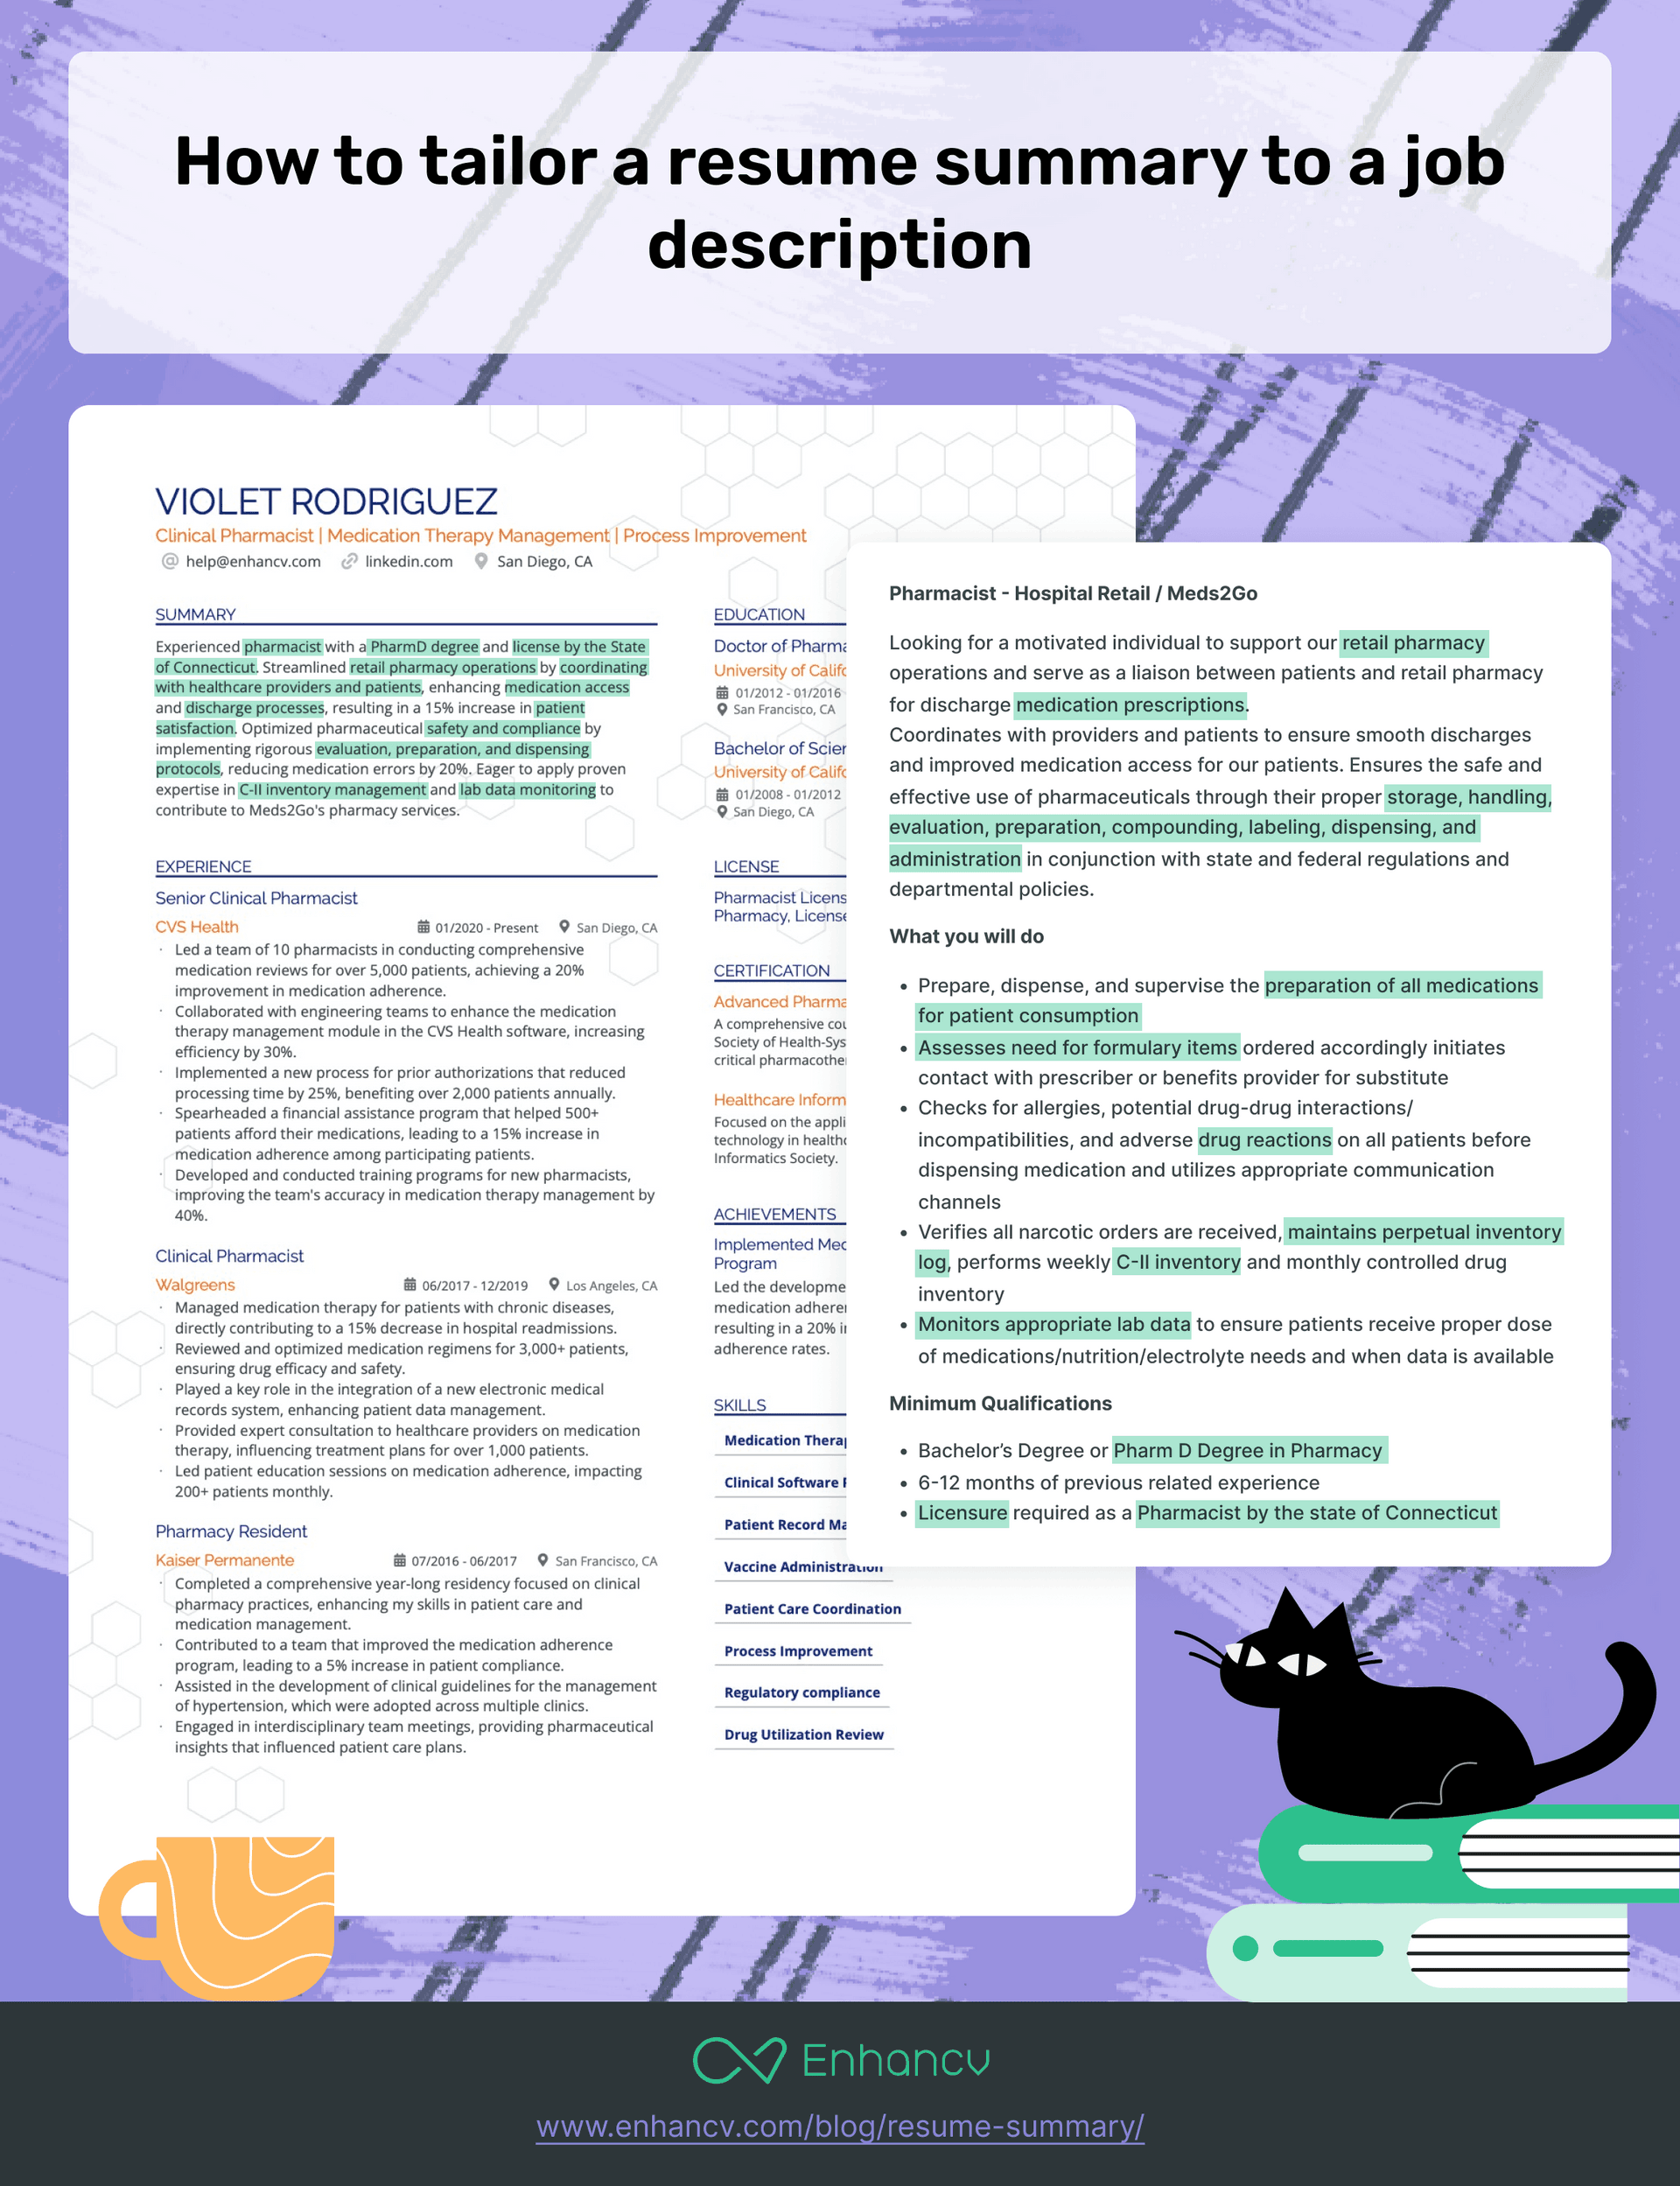 sample of a professional summary for a resume